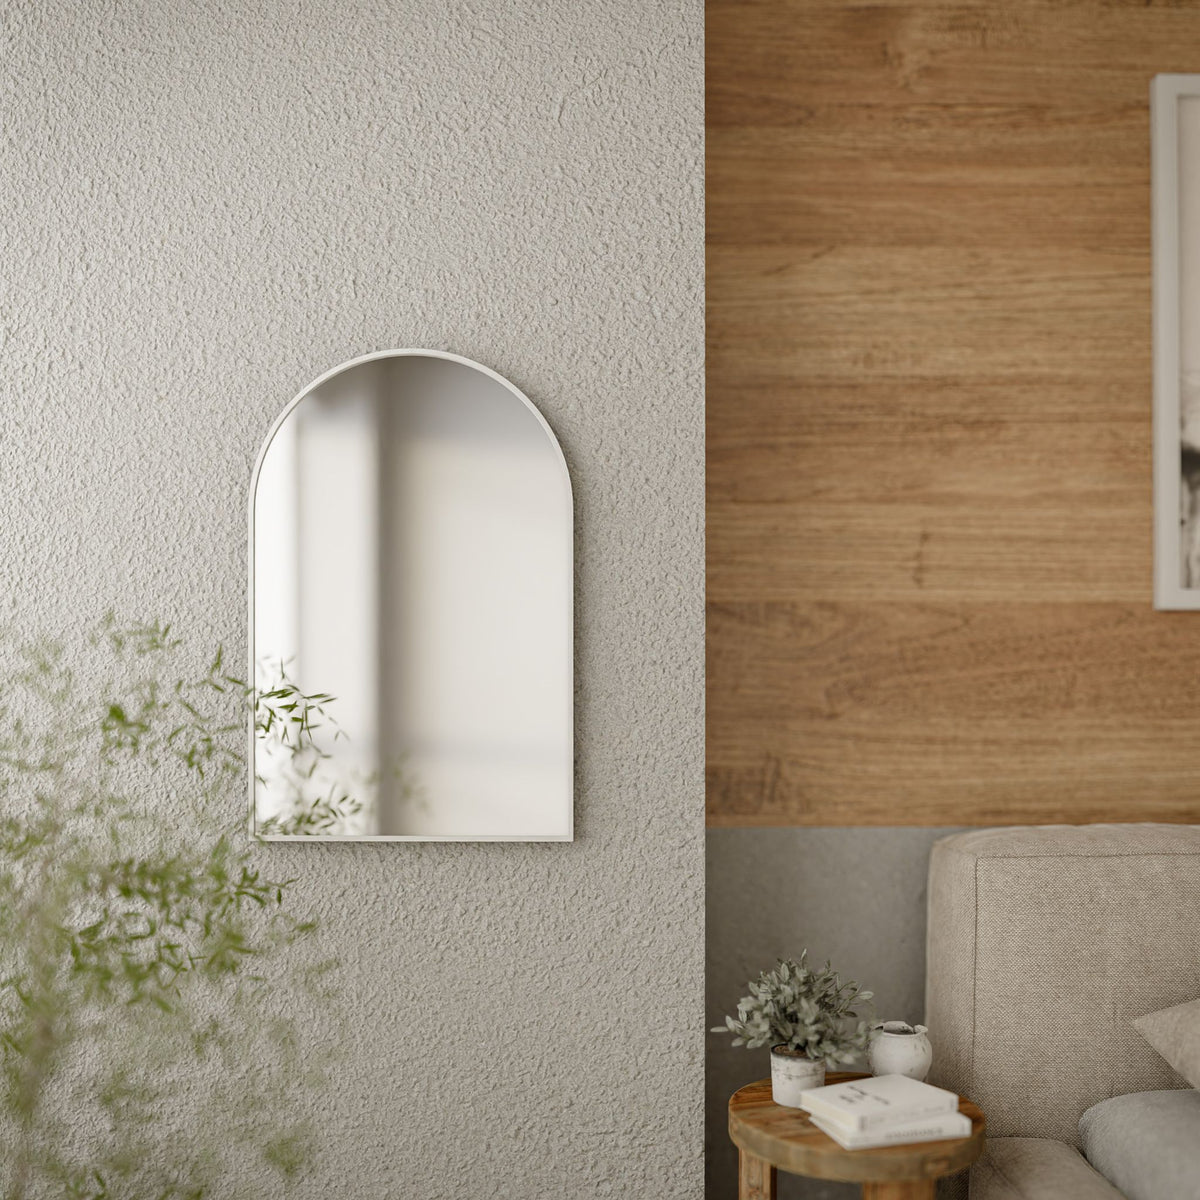 Cortesi Home Lucy Arched Mirror with Brushed Silver Aluminum Frame, 20x30